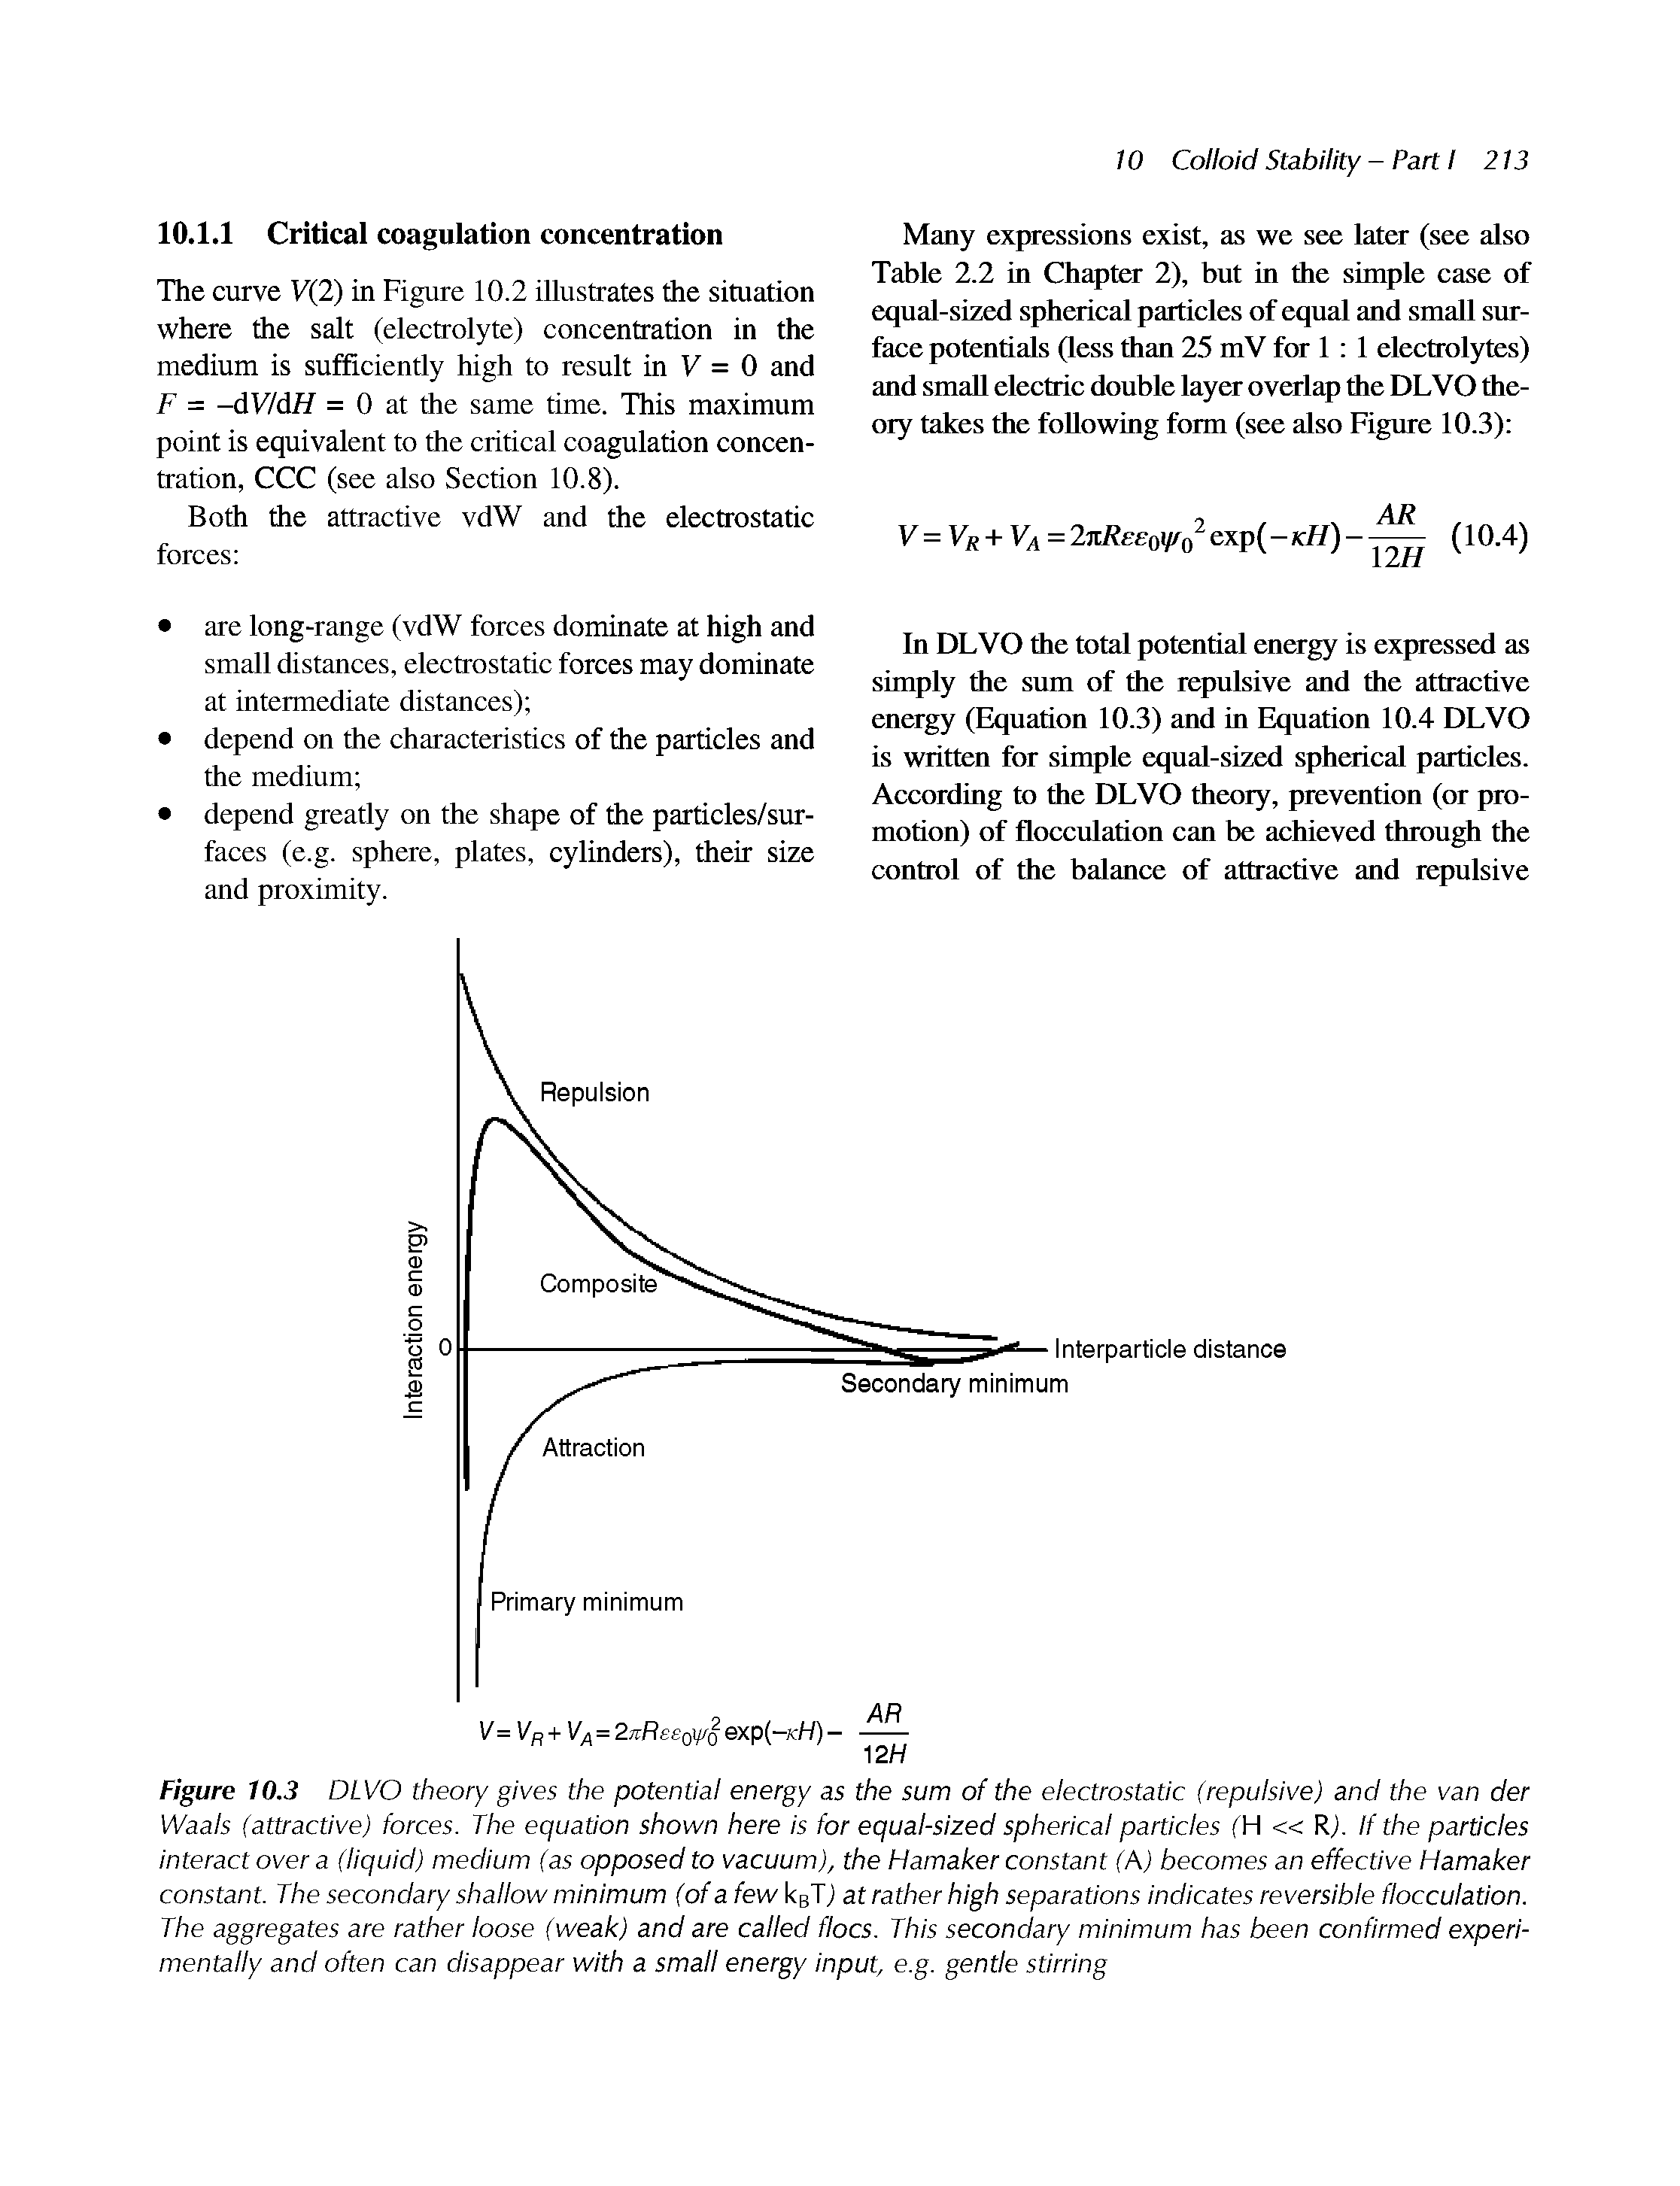 Figure 10.3 DLVO theory gives the potential energy as the sum of the electrostatic (repulsive) and the van der Waals (attractive) forces. The equation shown here is for equal-sized spherical particles (H R). If the particles Interact over a (liquid) medium (as opposed to vacuum), the Hamaker constant (A) becomes an effective Hamaker constant. The secondary shallow minimum (of a few kaTj at rather high separations indicates reversible flocculation. The aggregates are rather loose (weak) and are called floes. This secondary minimum has been confirmed experimentally and often can disappear with a small energy input, e.g. gentle stirring...